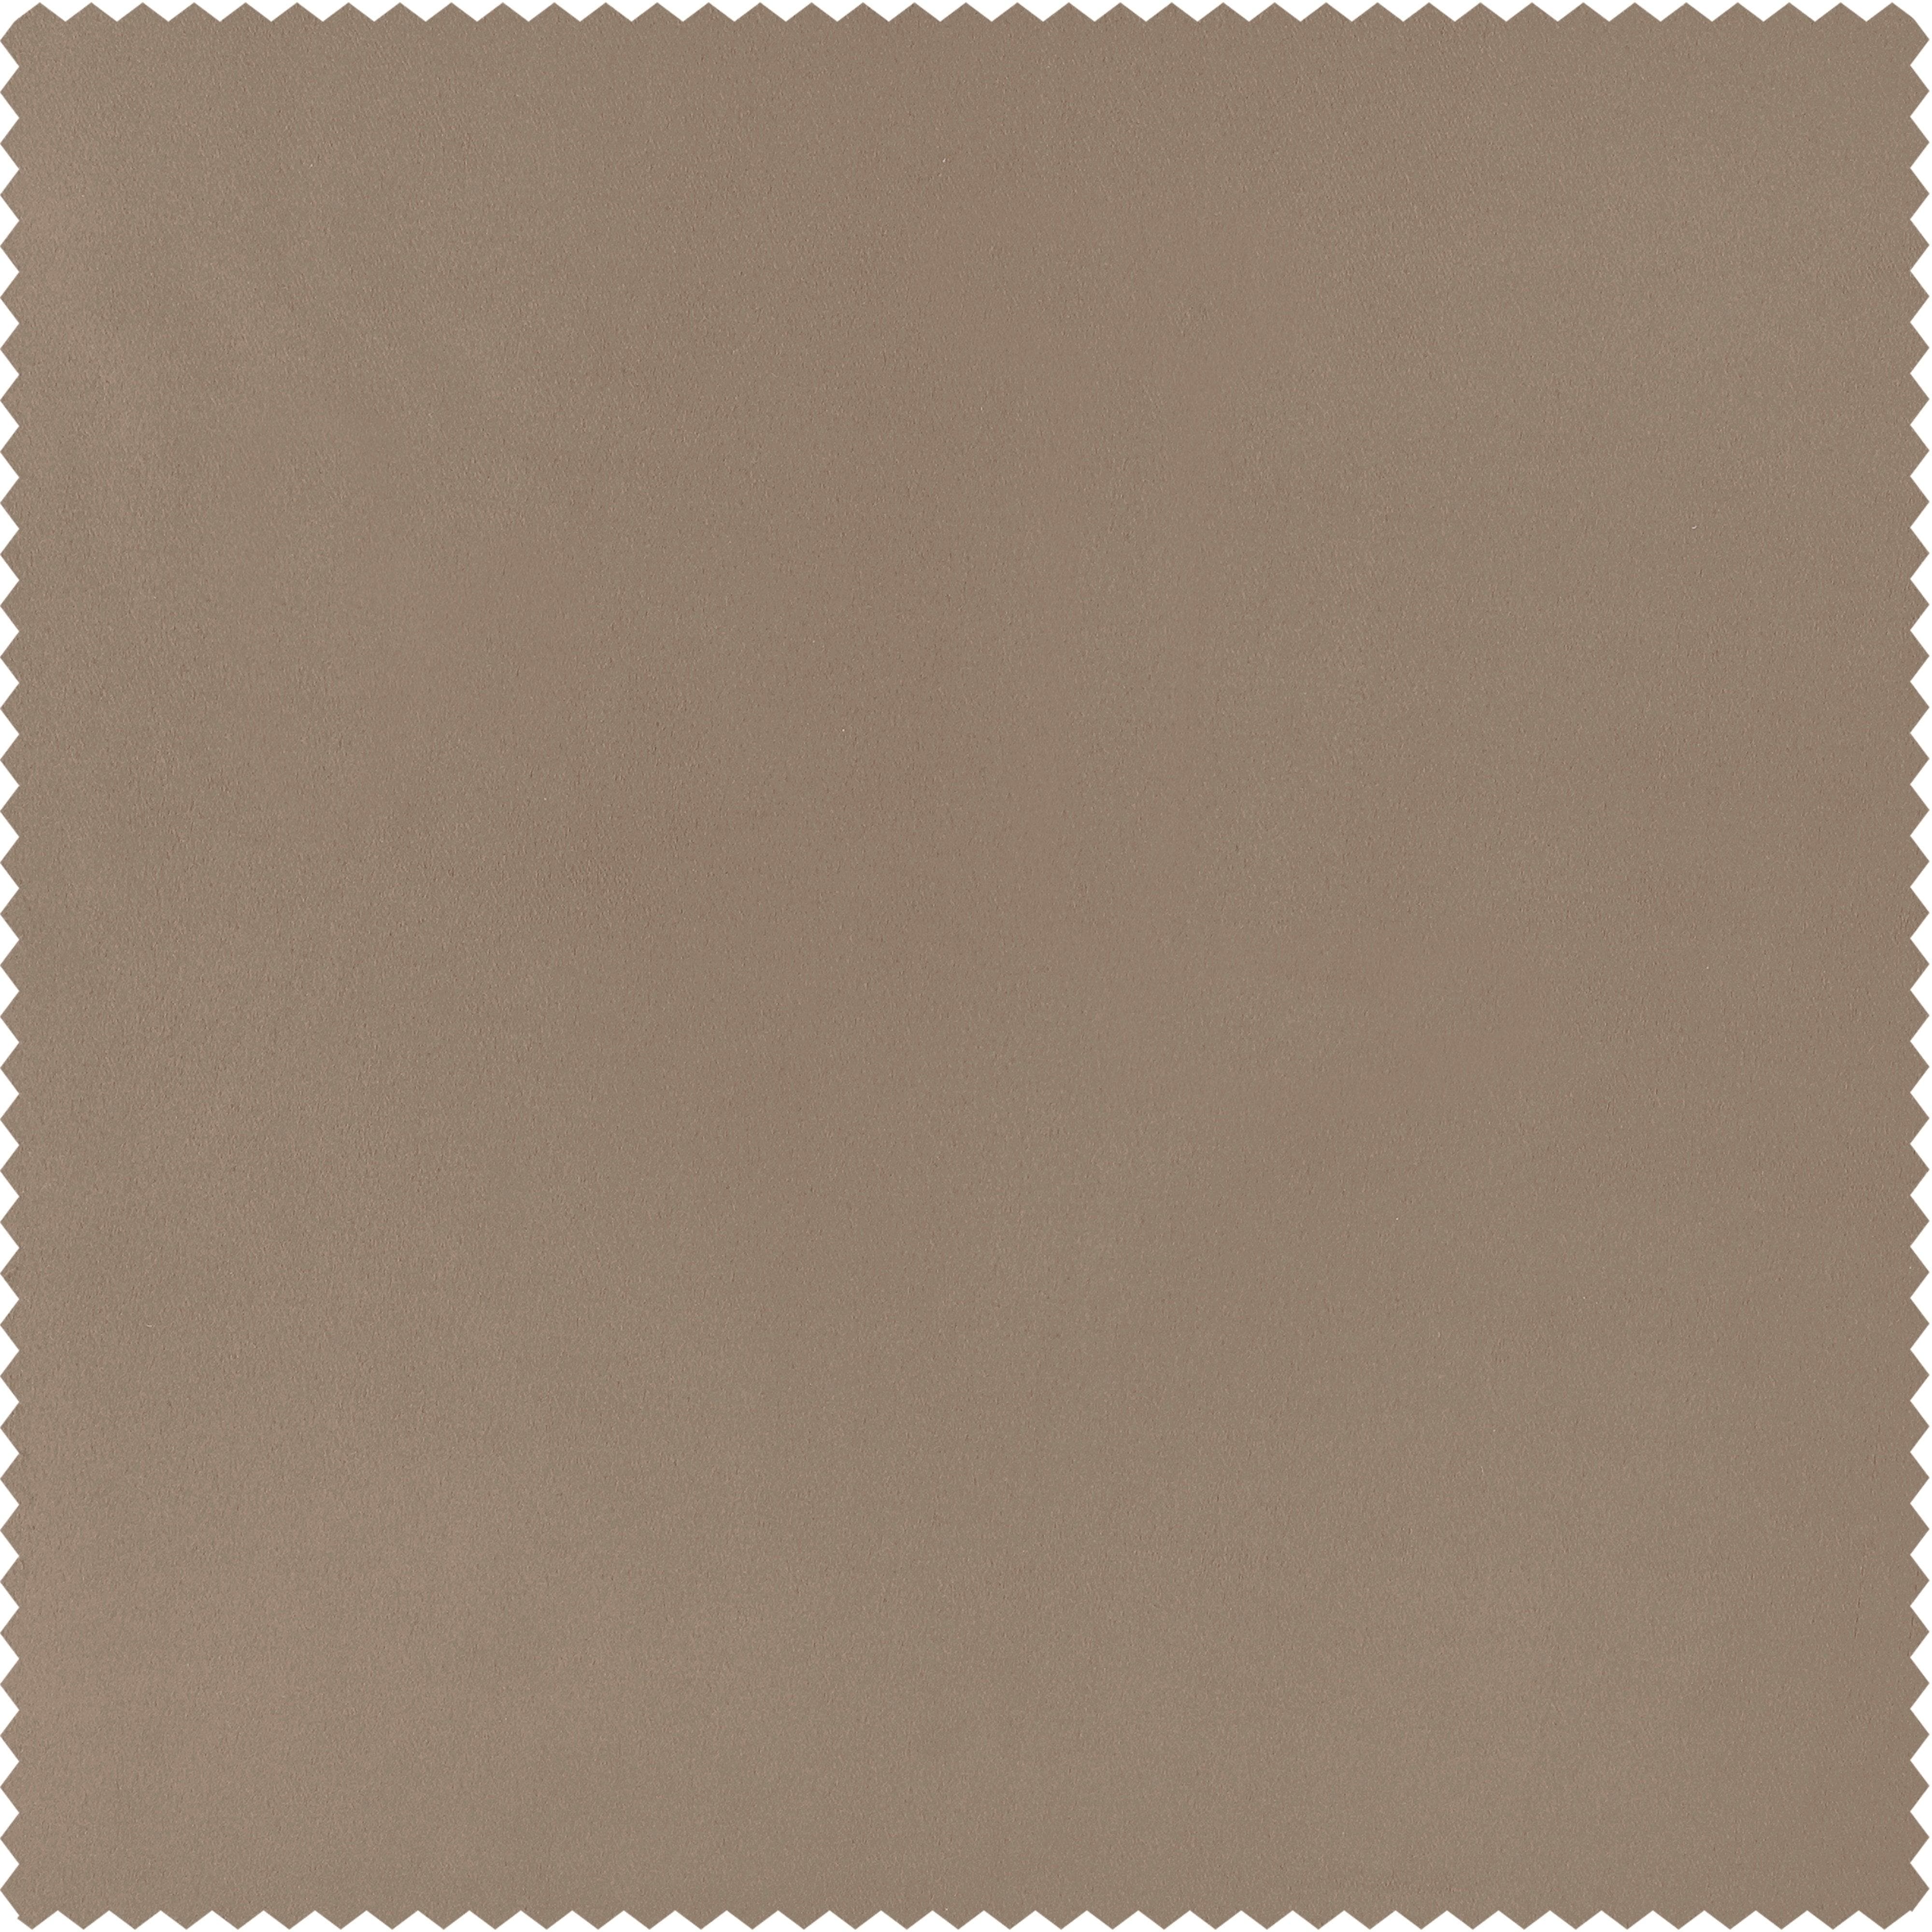 Banyan Brown Solid Polyester Swatch